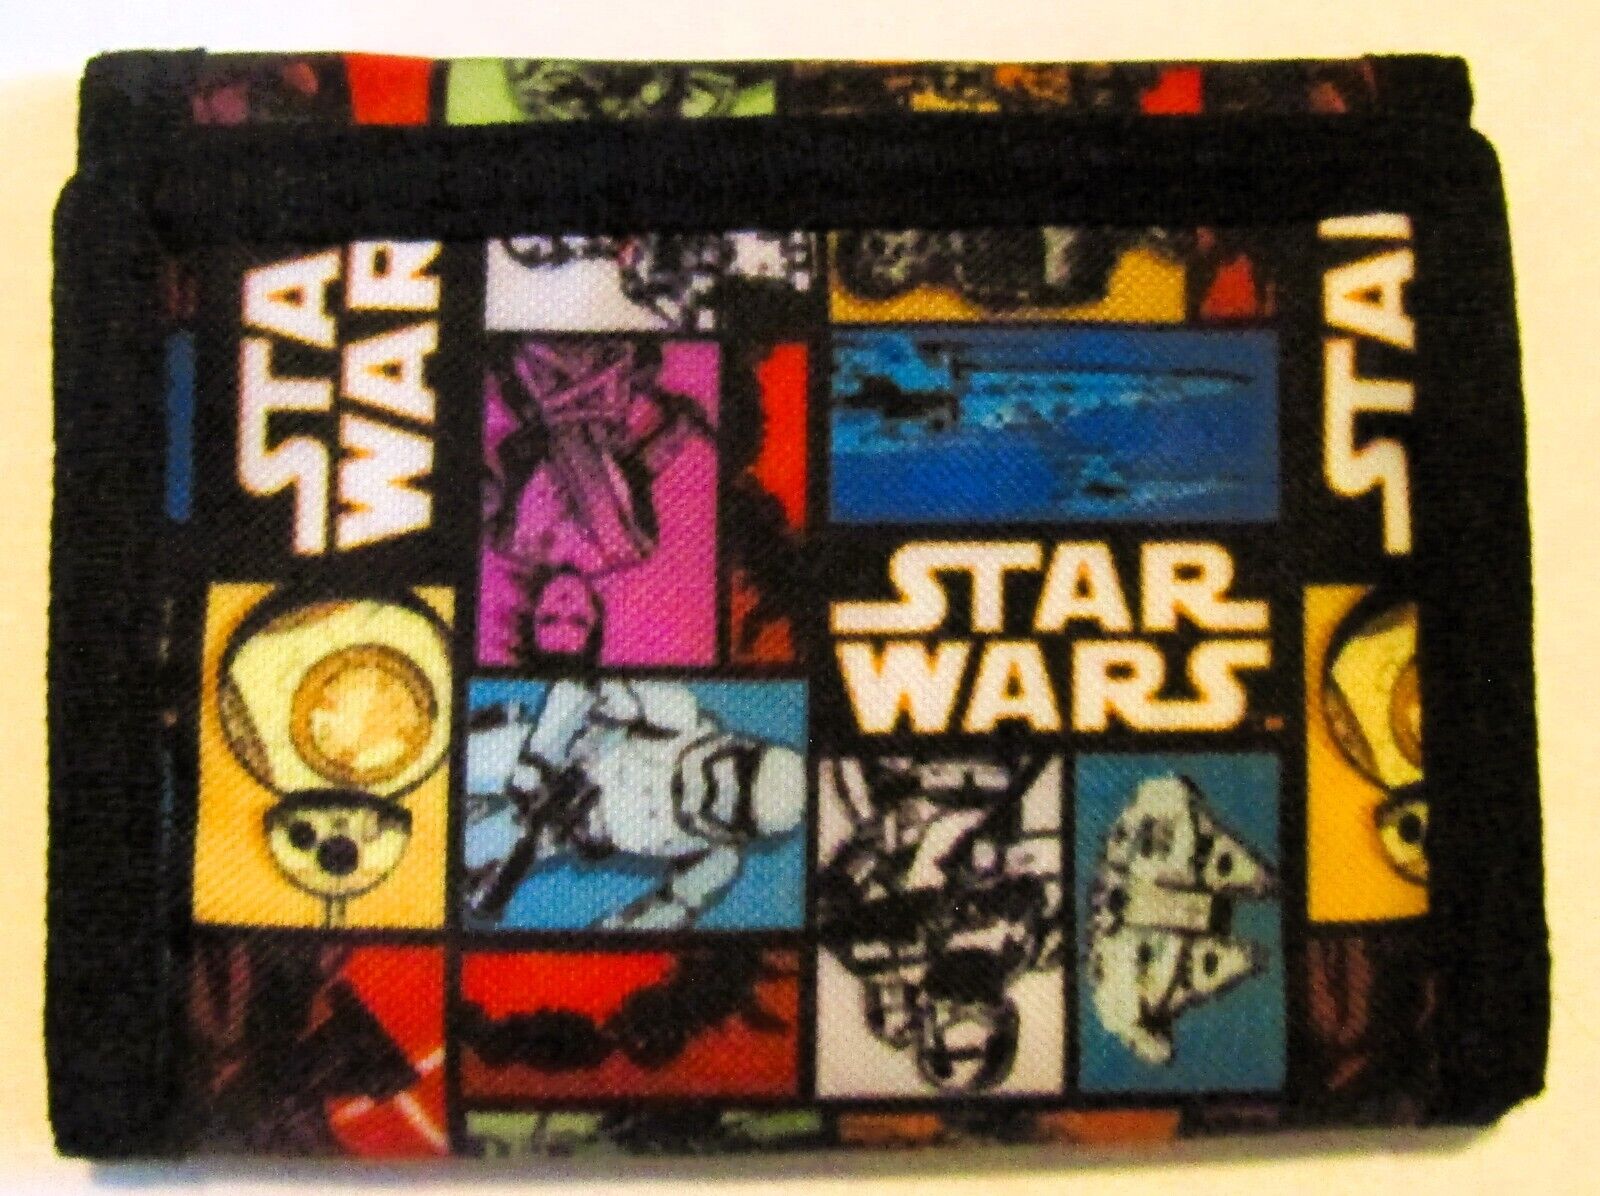 Star Wars Trifold Wallet Colorful Graphic, zippered change holder, very nice.